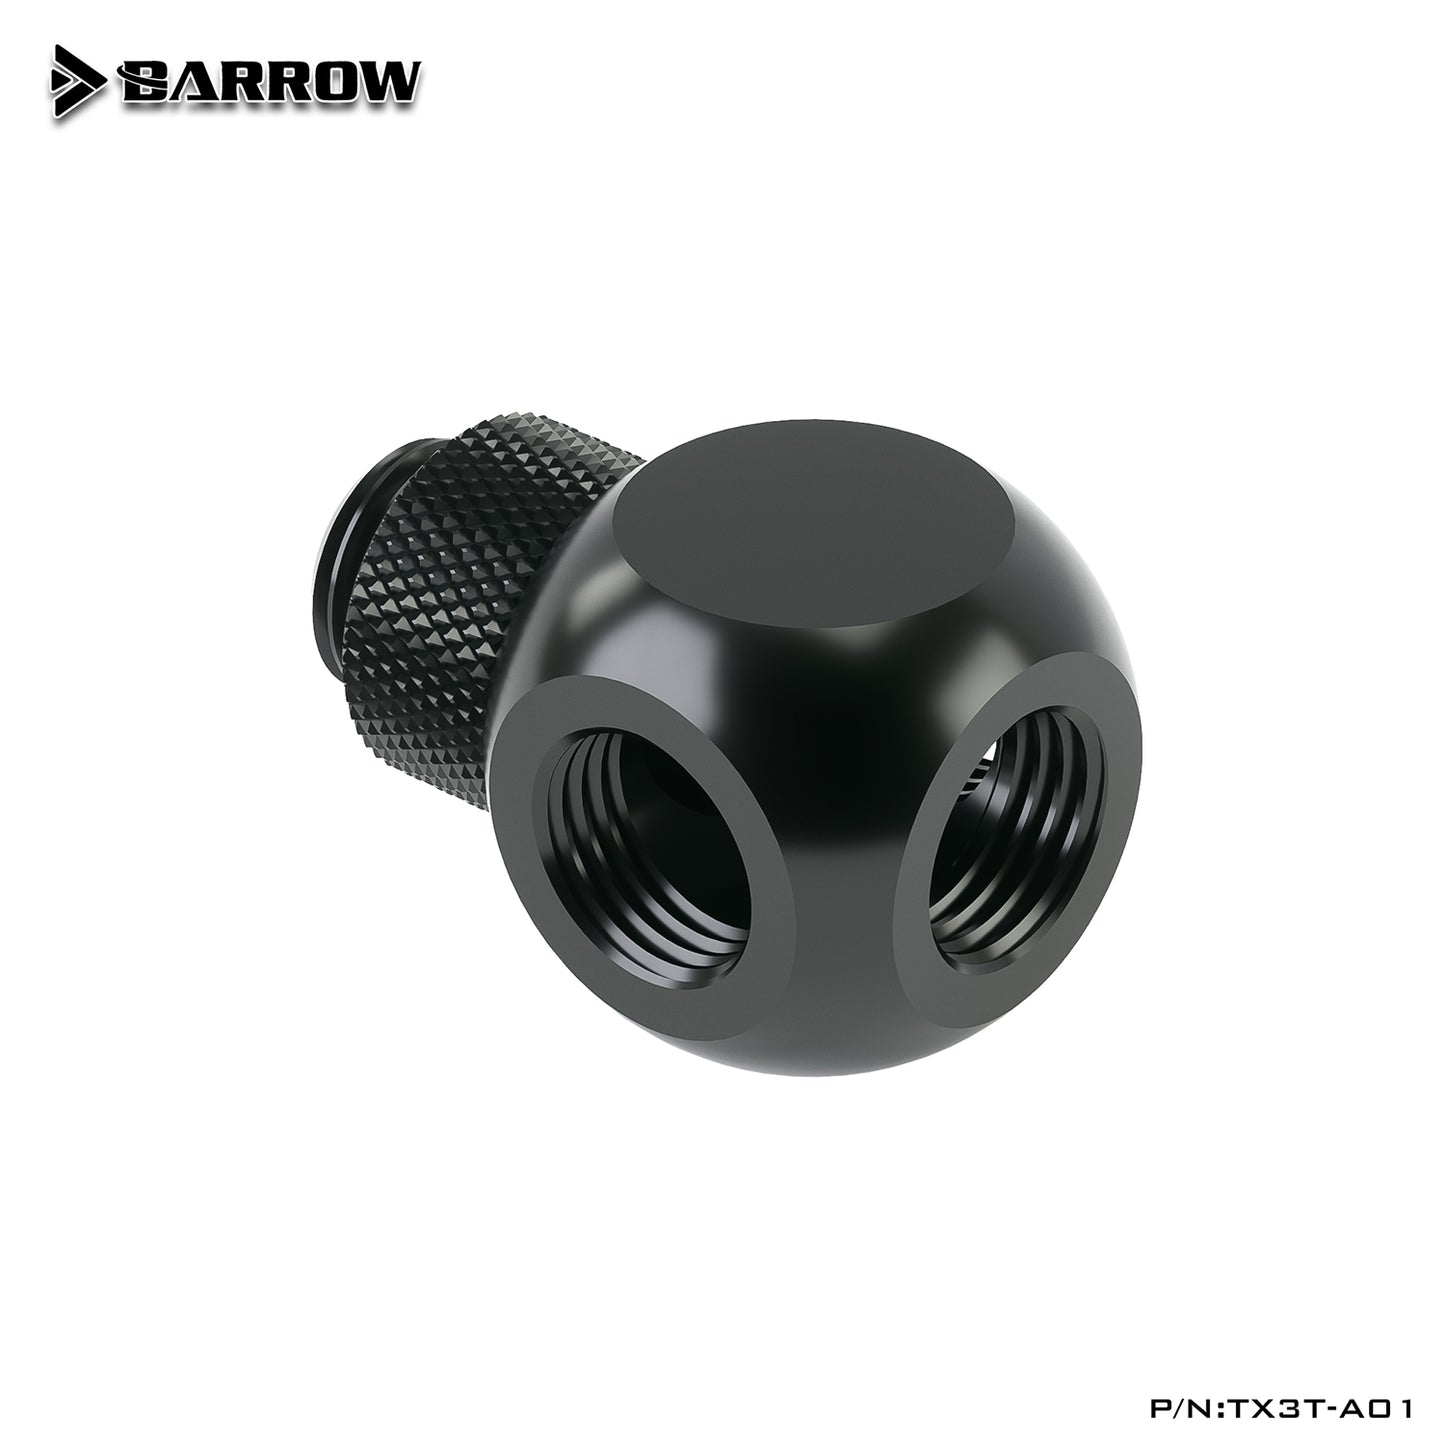 Barrow G1/4" Extender Rotation, 4-way Cubic Adaptor Seat Water Cooling Computer Accessories,TX4T-A01